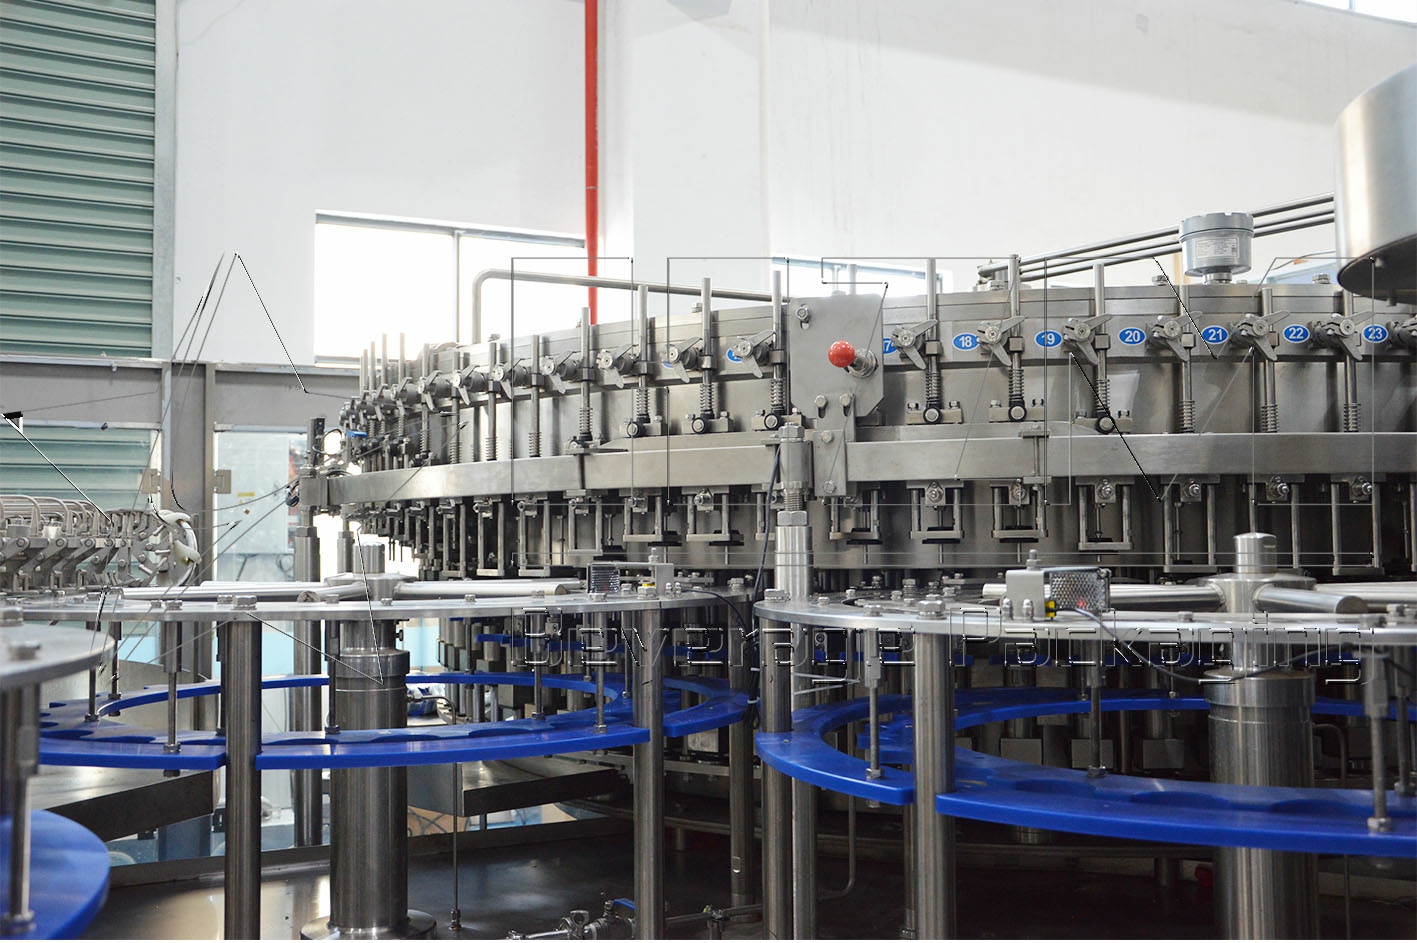 Electronic Flowmeter Contactless Aseptic Cold Filling Machine